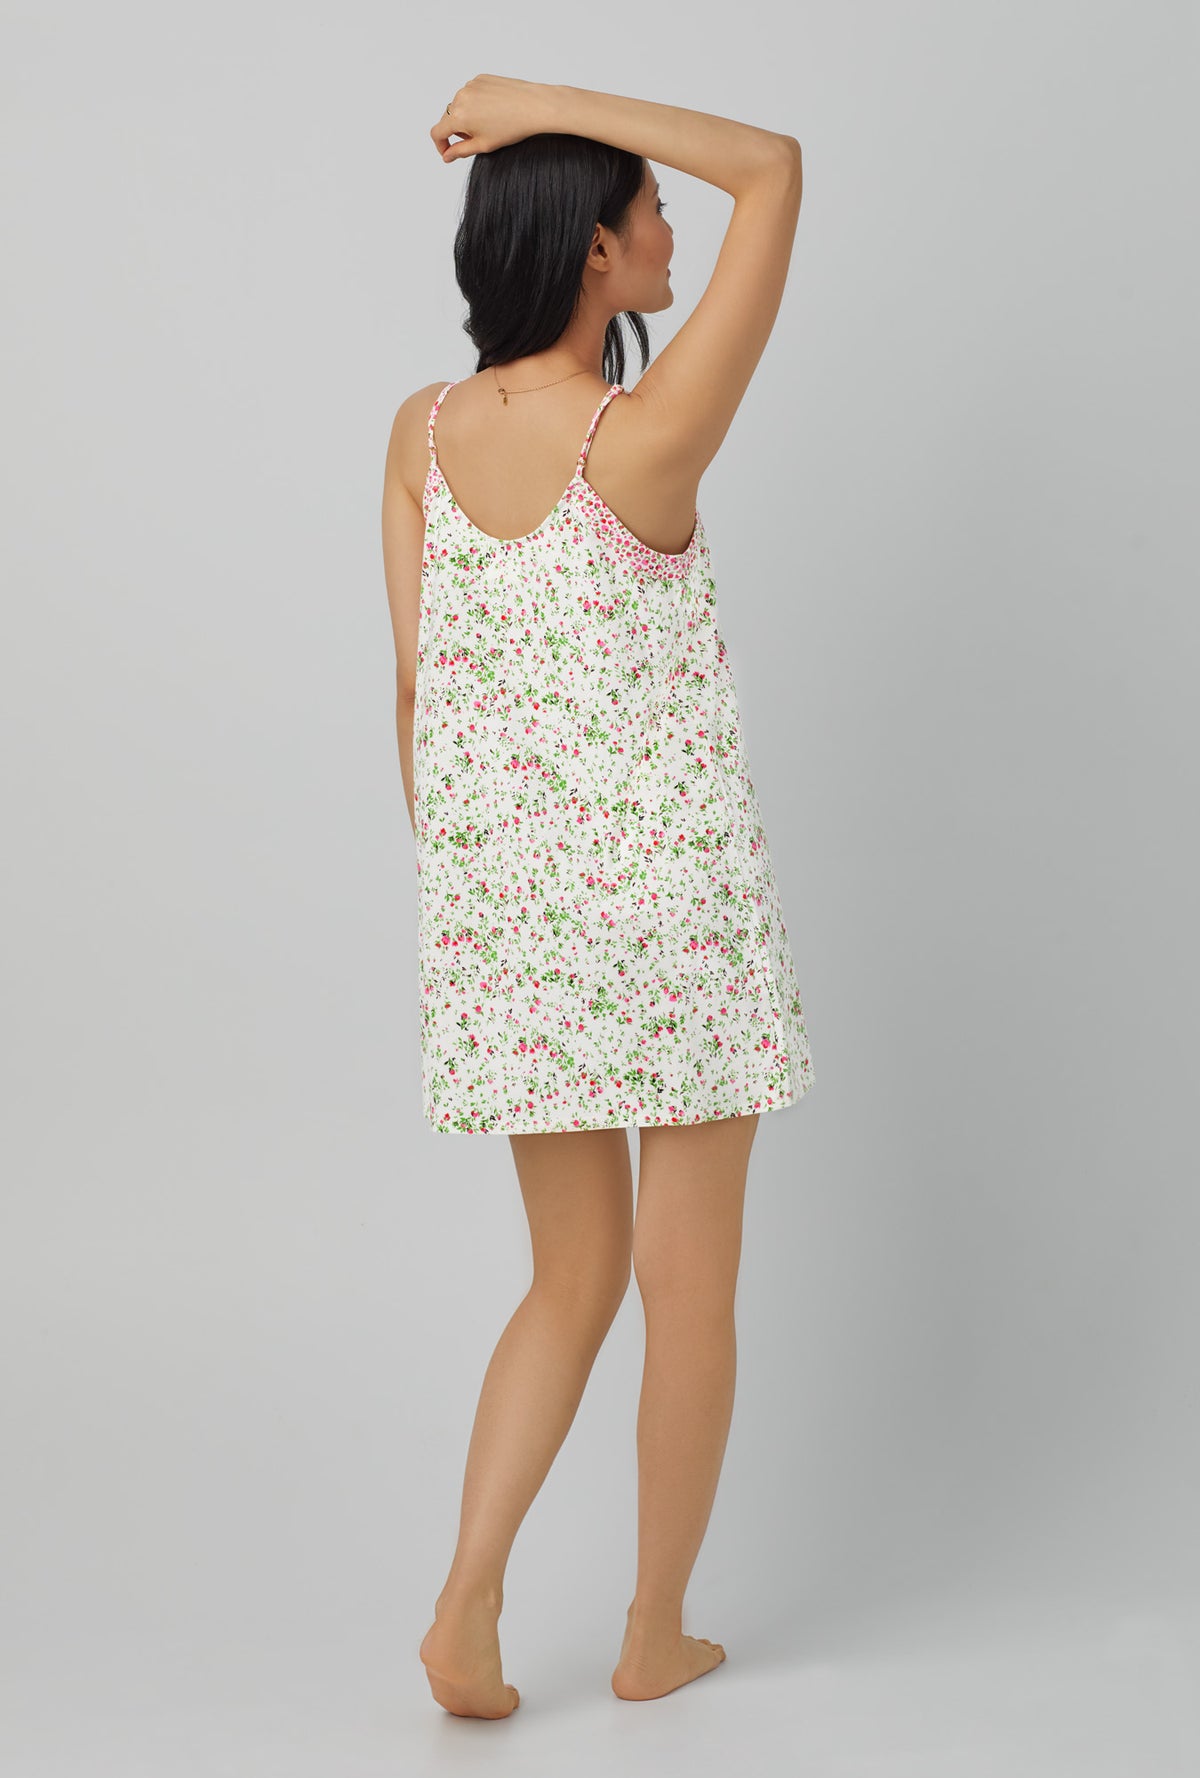 A lady wearing white Stretch Jersey Chemise with Nellie print